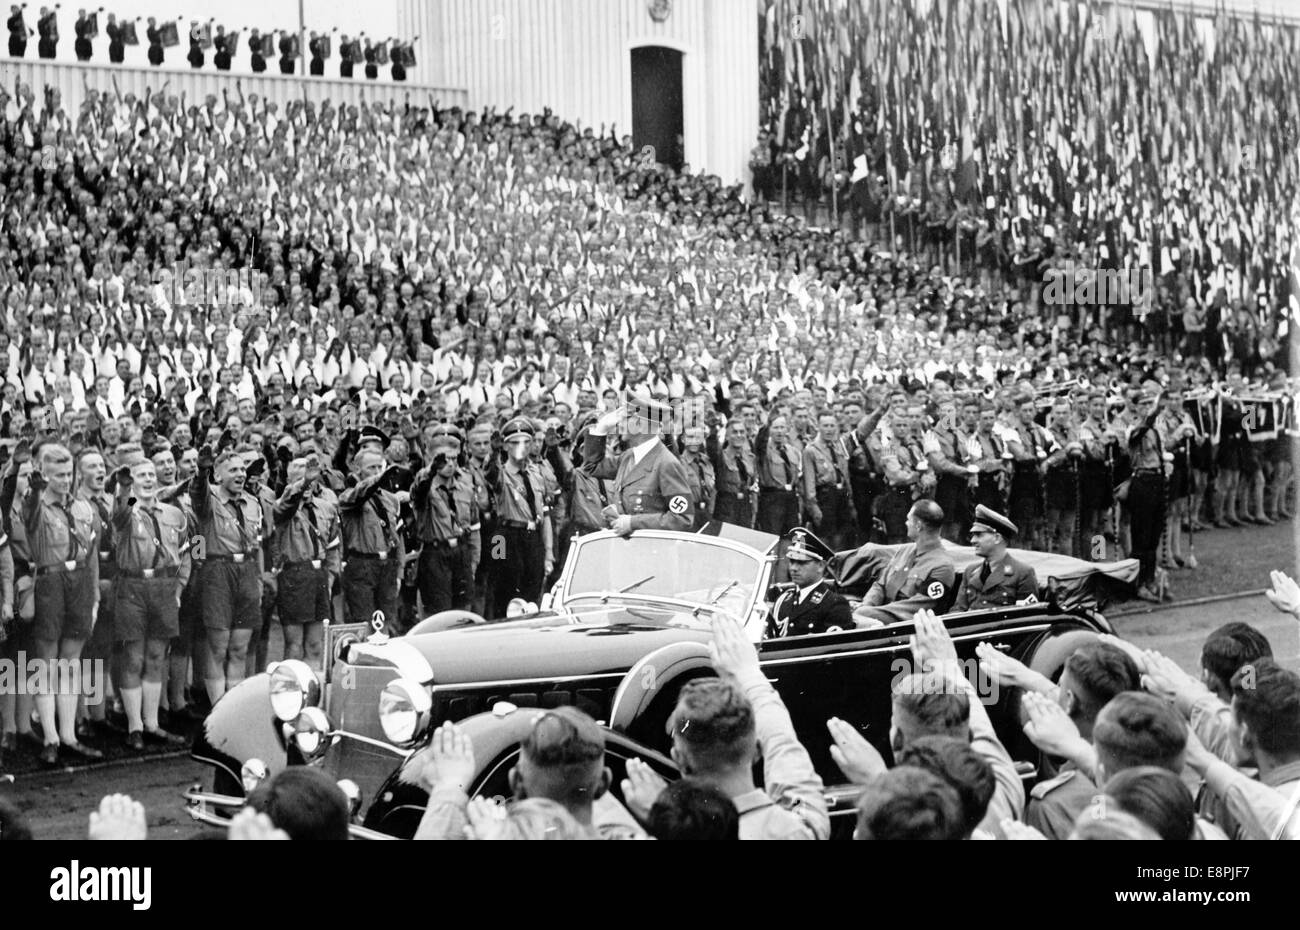 Nuremberg Rally 1938 in Nuremberg, Germany - Adolf Hitler drives past and greets members of the Hitler Youth on the occasion of the roll call of the Hitler Youth (HJ) at 'Stadium of the Hitler Youth' at the Nazi party rally grounds. (Flaws in quality due to the historic picture copy) Fotoarchiv für Zeitgeschichtee - NO WIRE SERVICE - Stock Photo